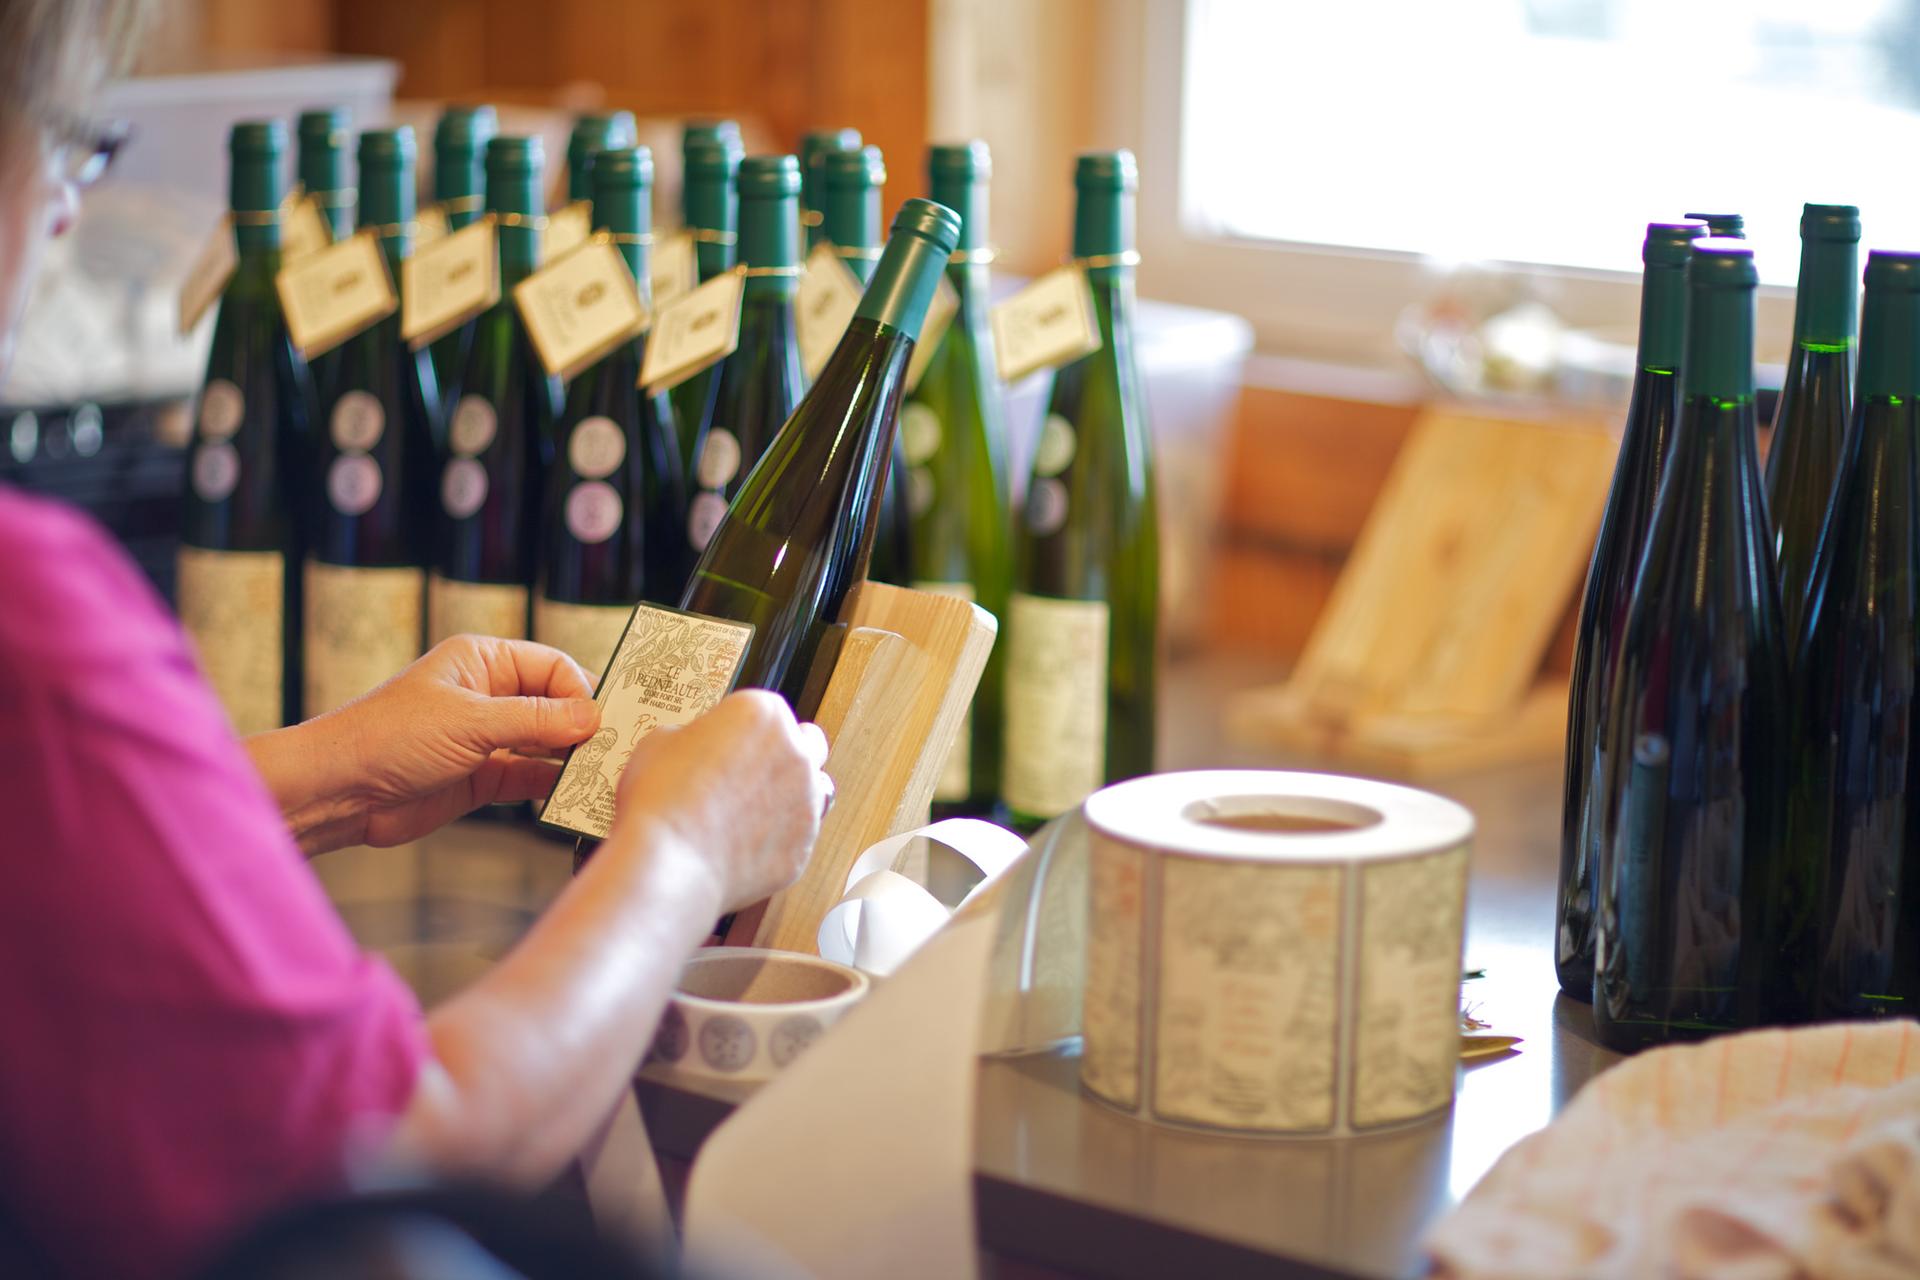 One stop on the Wine Route: Cidres et Vergers Pedneault – Credit: Asymetric/Finn O’Hara